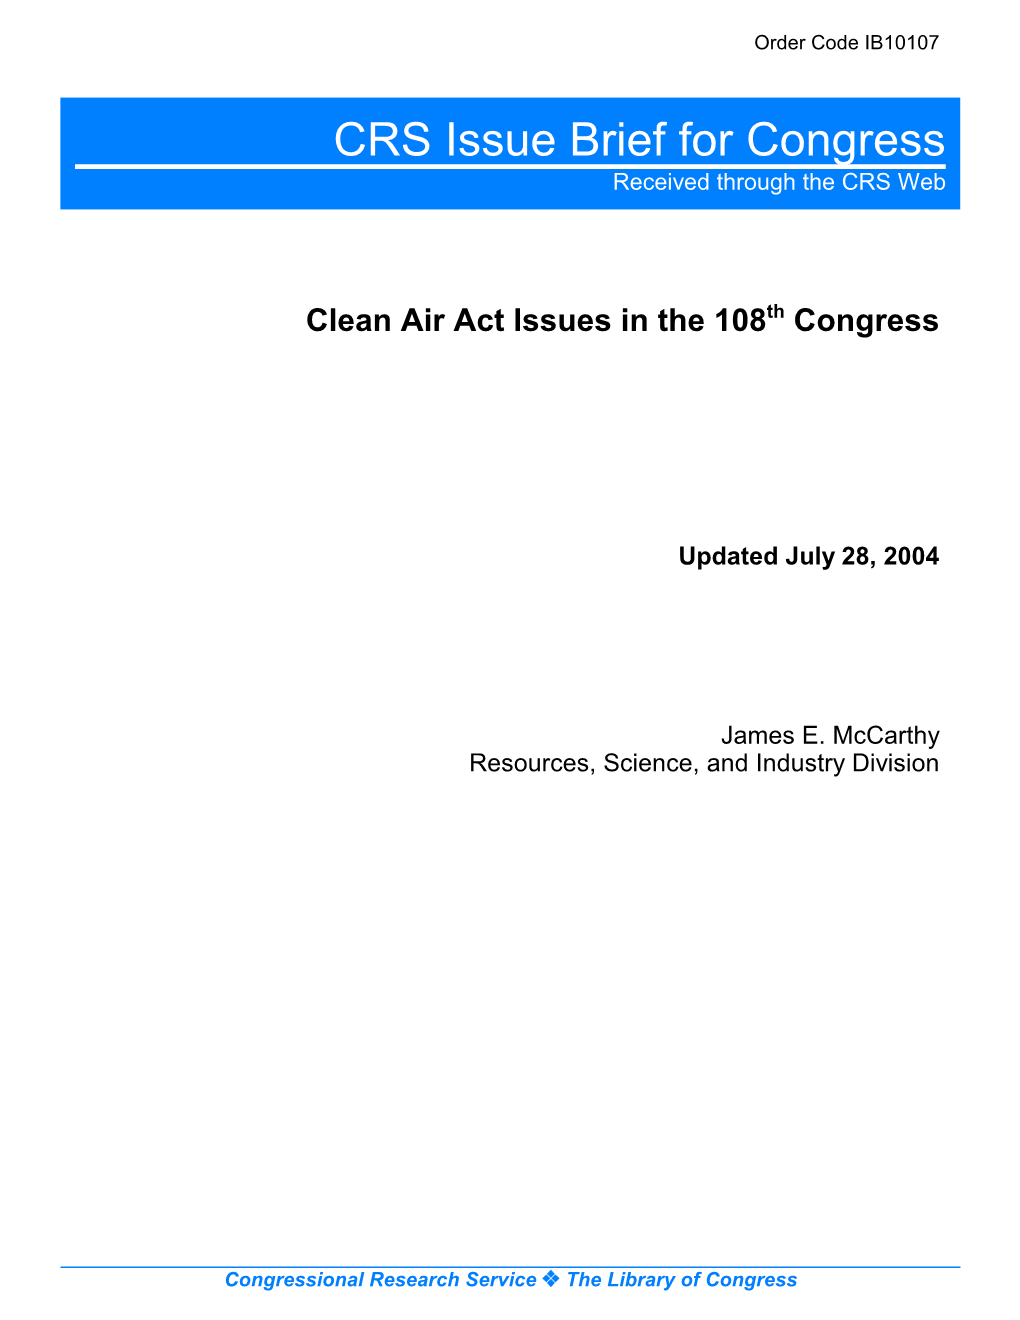 Clean Air Act Issues in the 108Th Congress